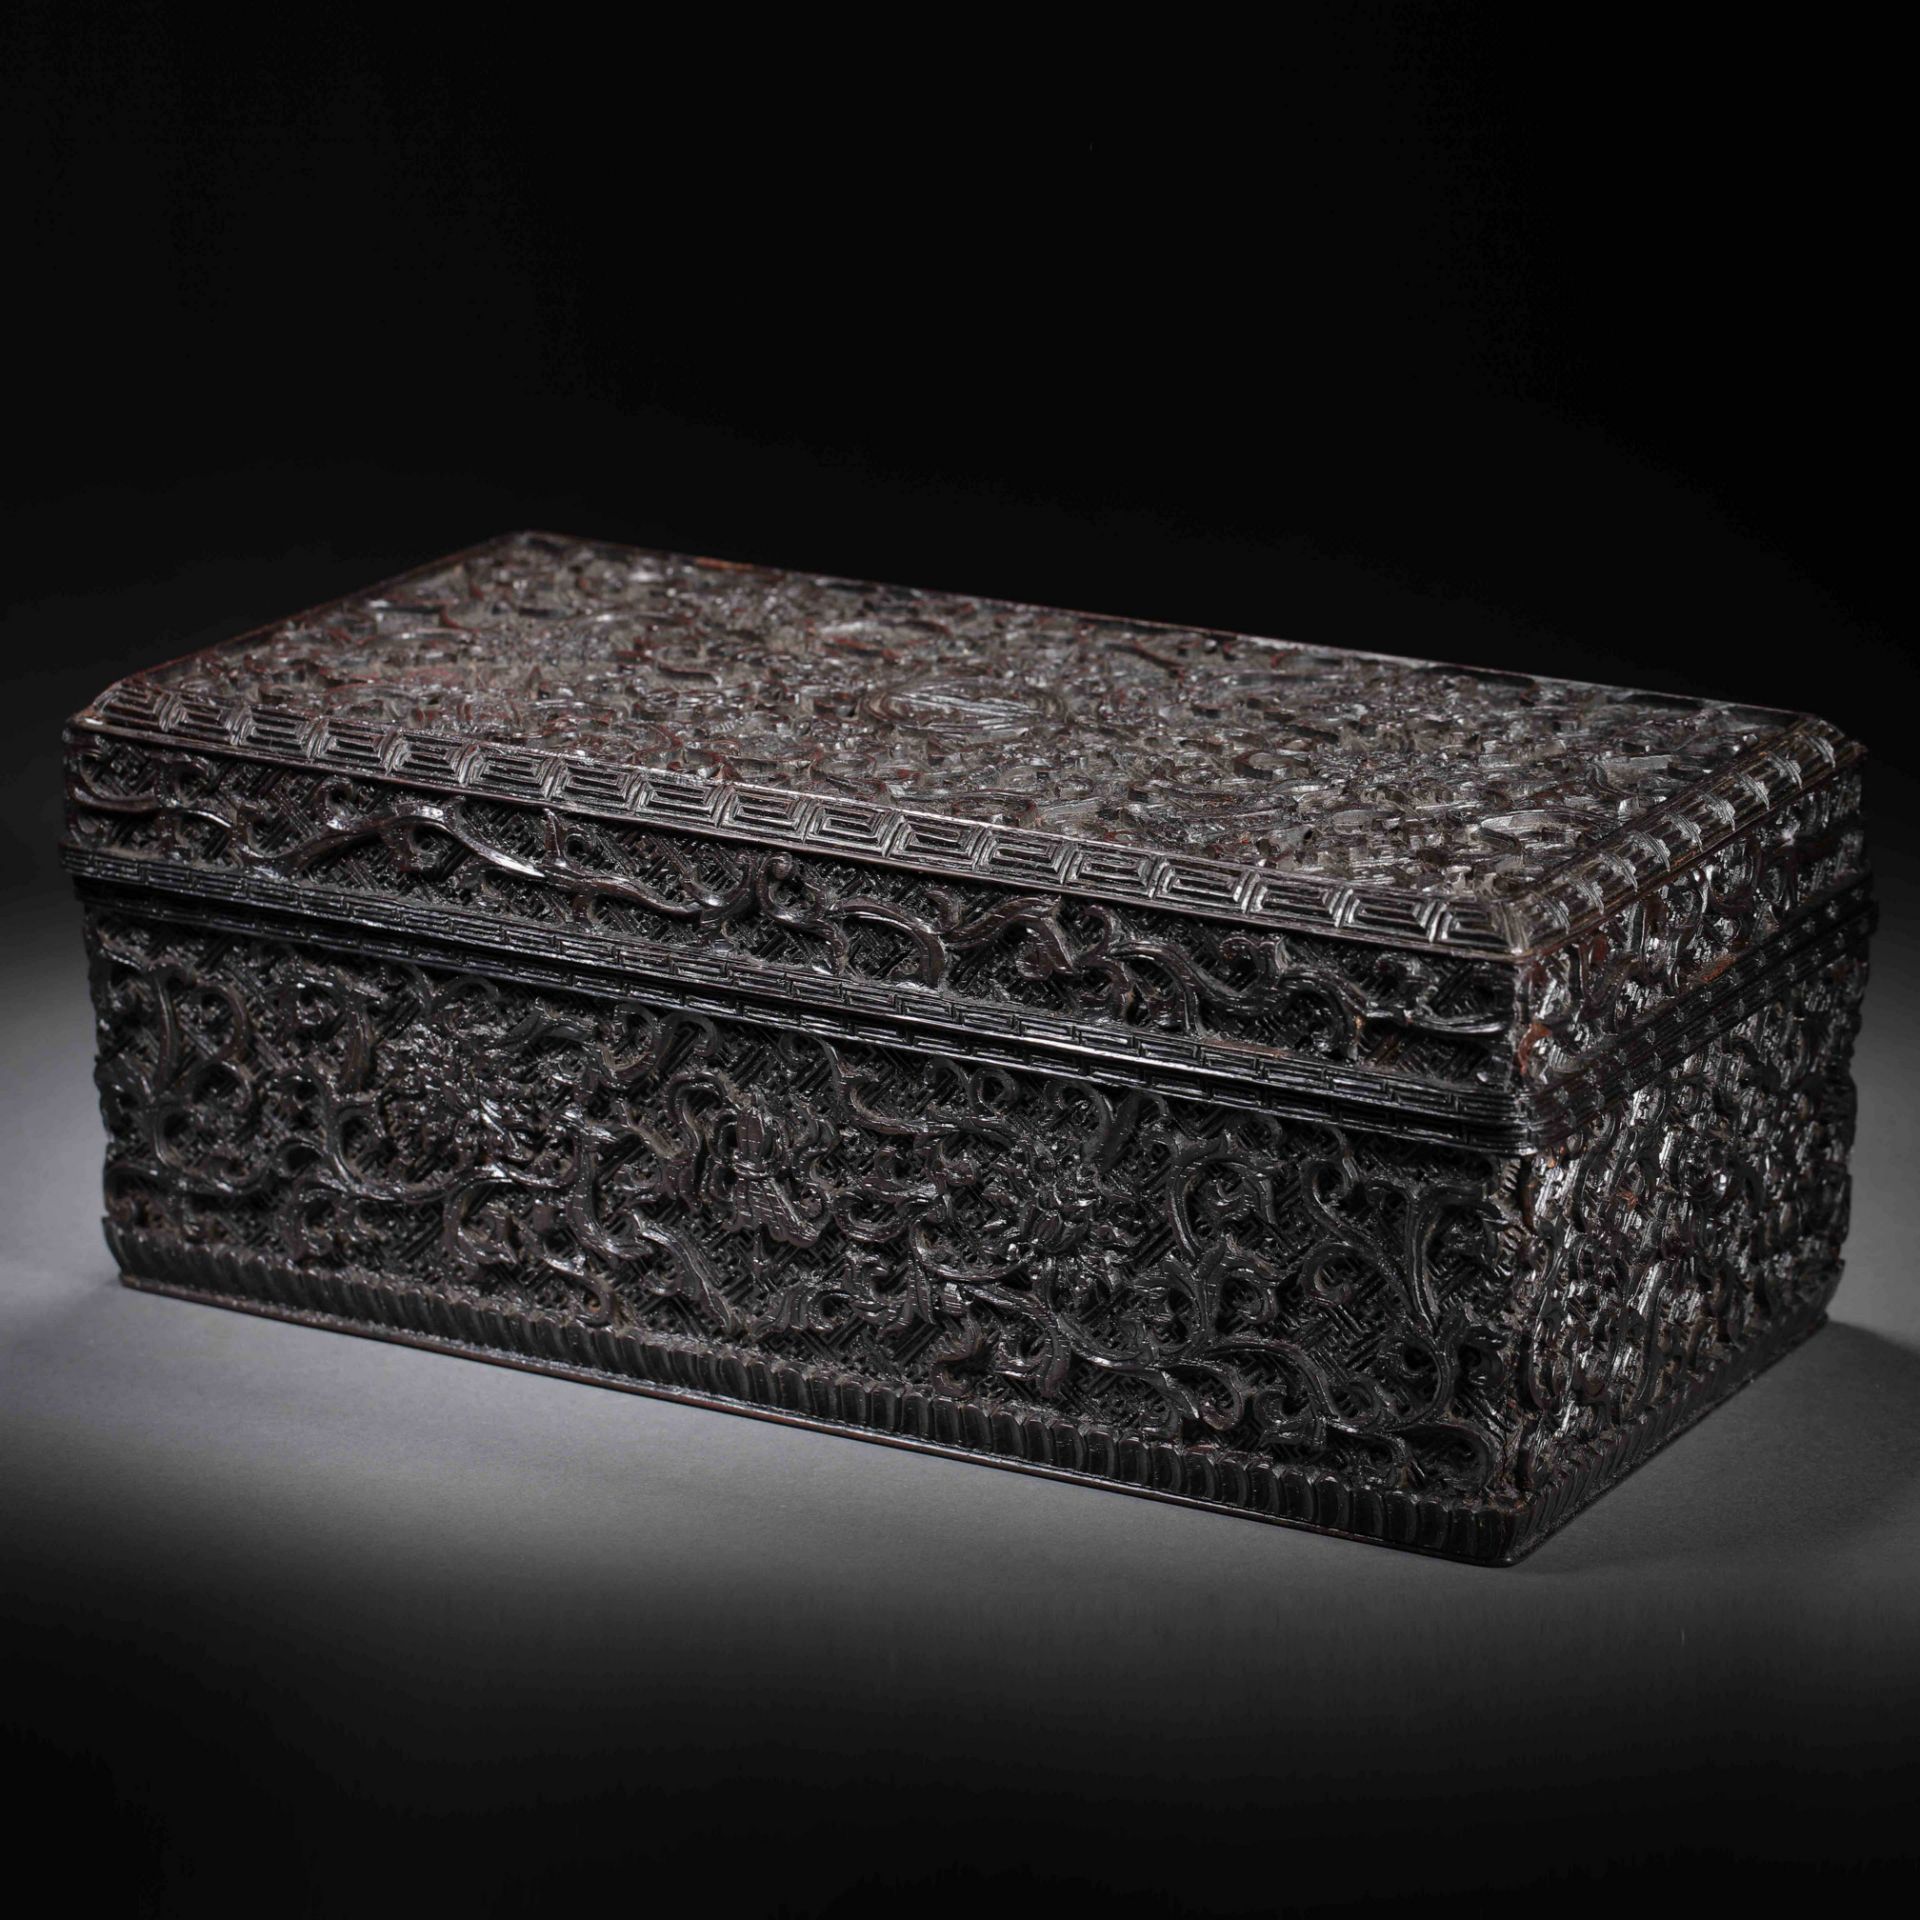 Qing Dynasty court rosewood carved lid box